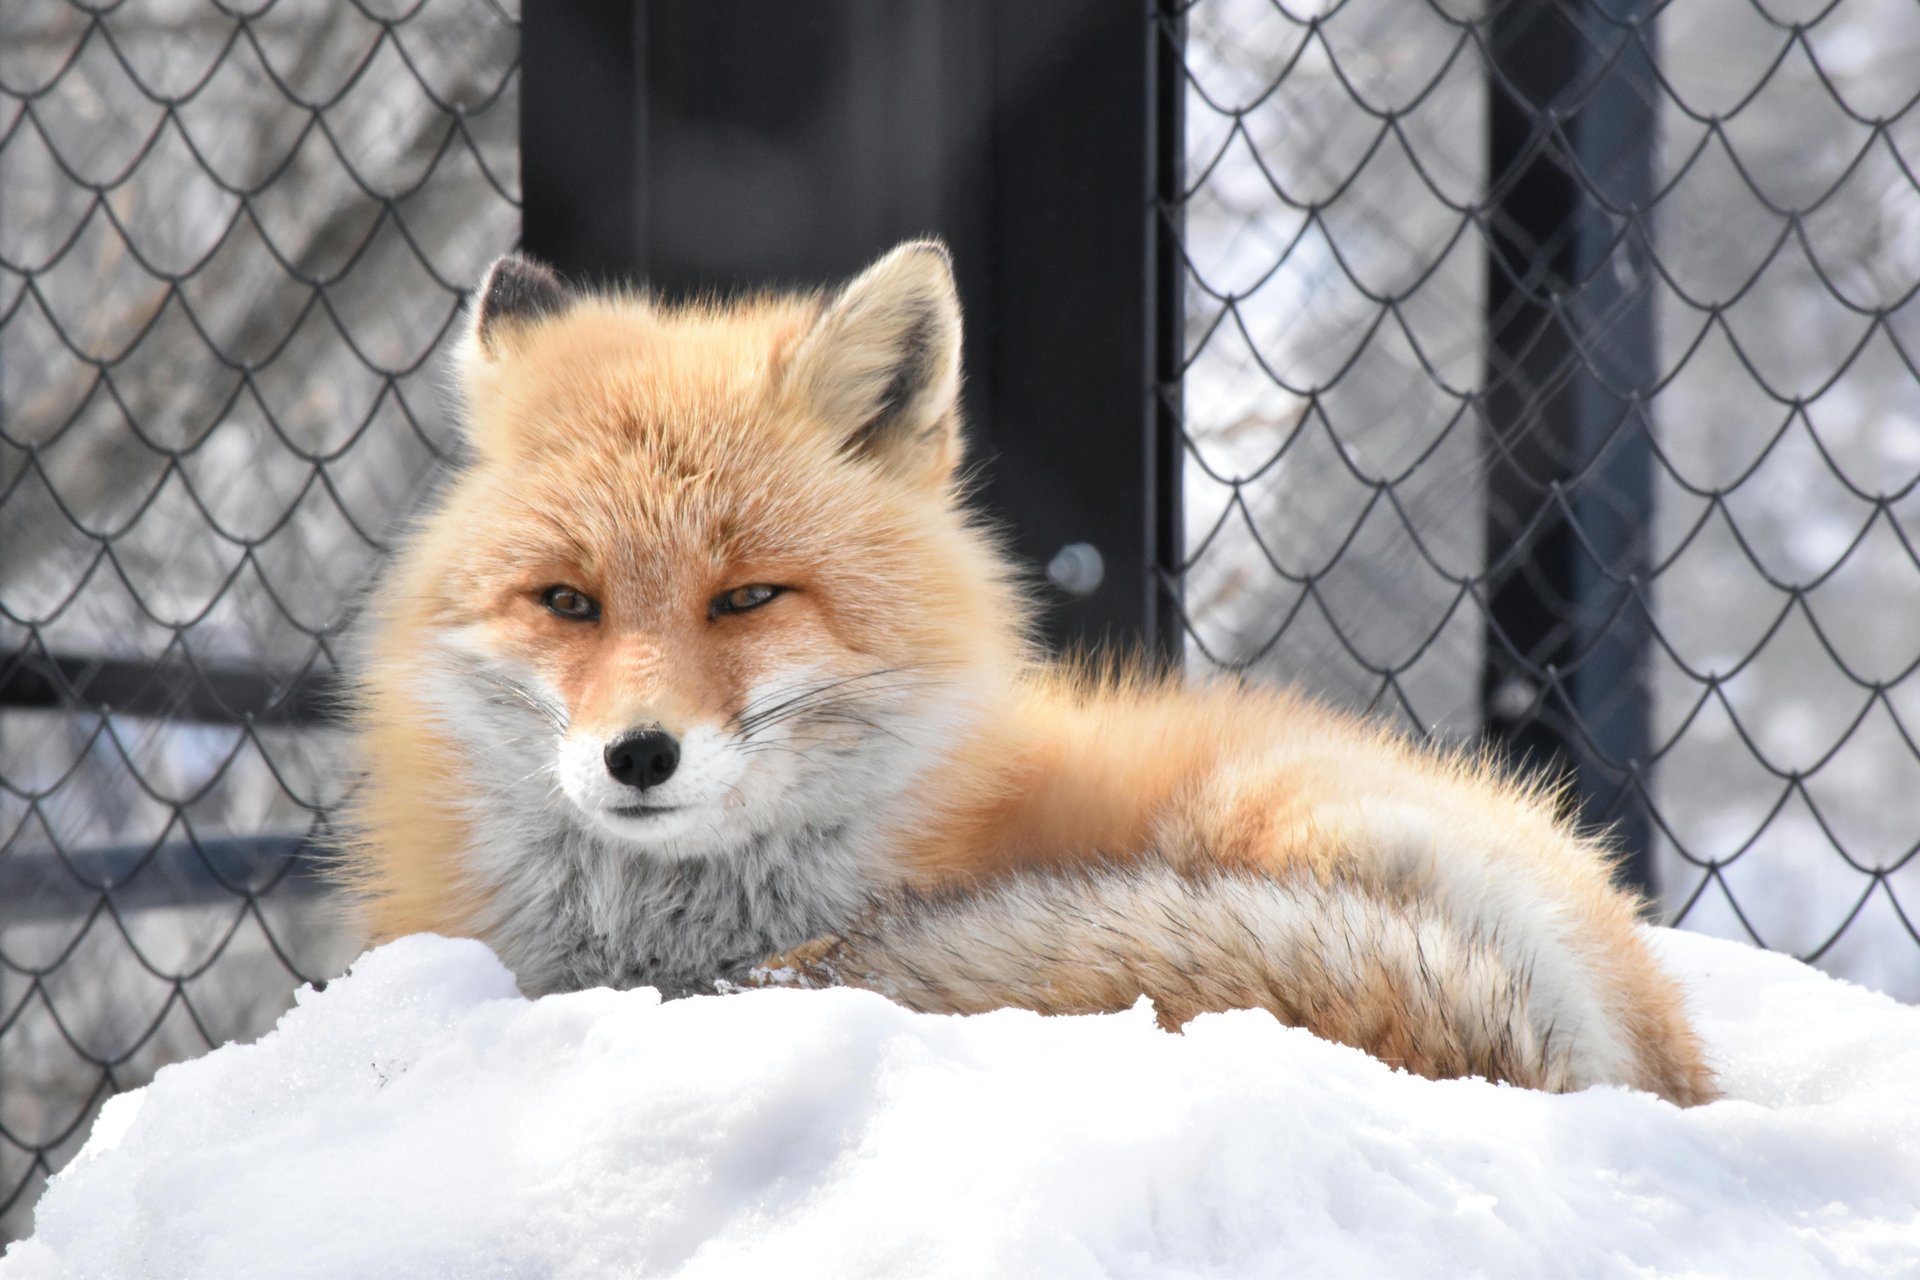 A fox is resting in a cage or enclosure surrounded by snow